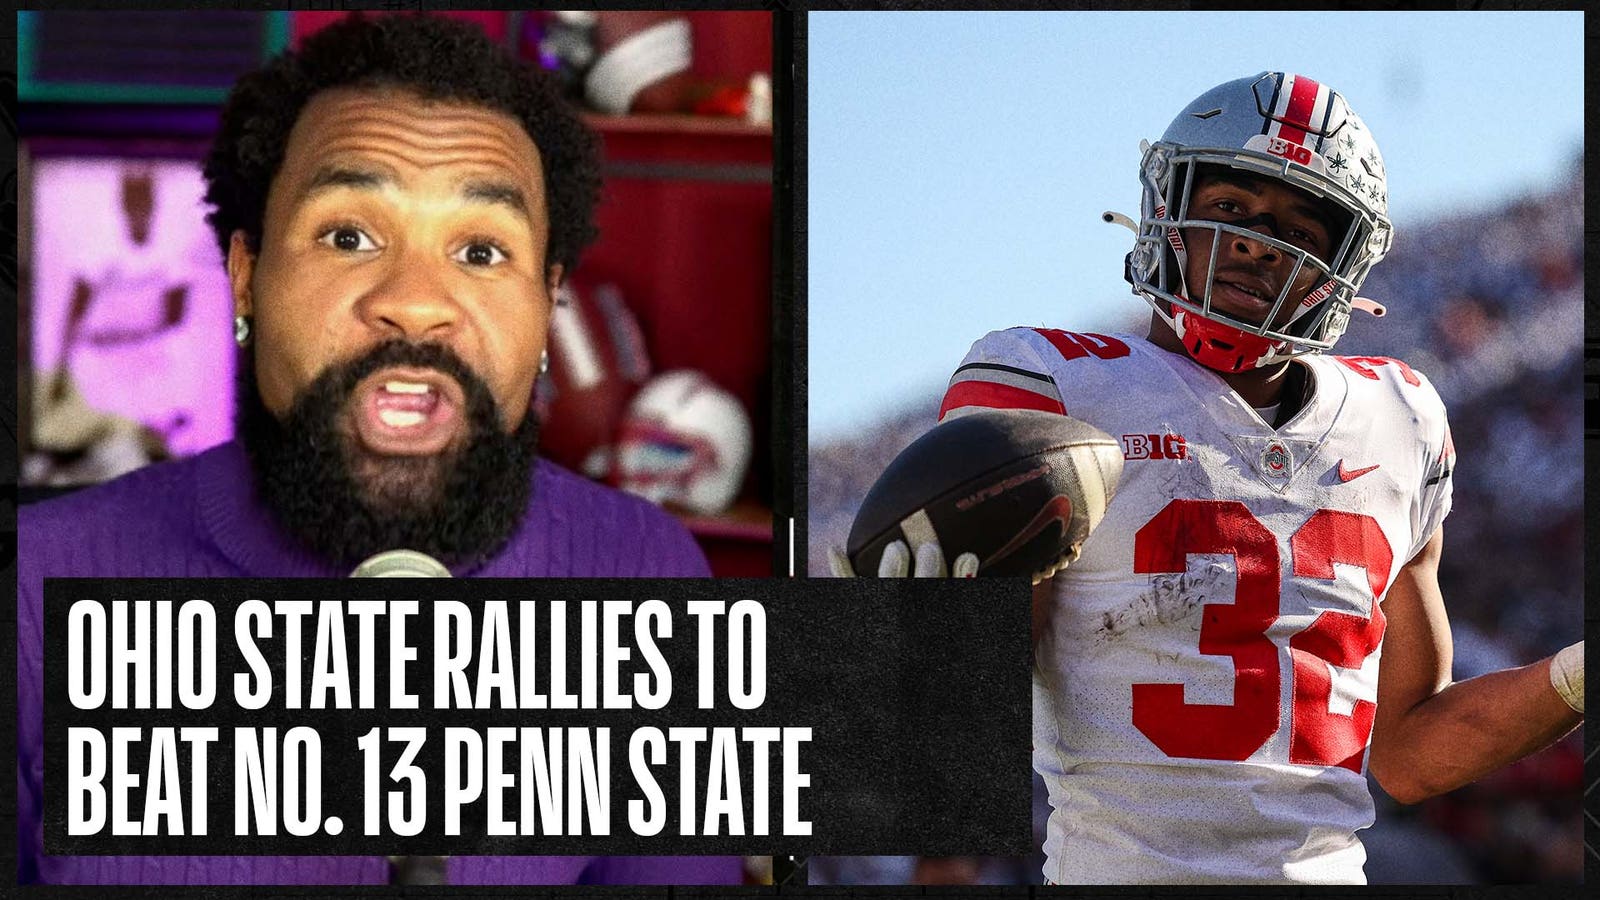 Ohio State rallies to beat No. 13 Penn State | Number One College Football Show